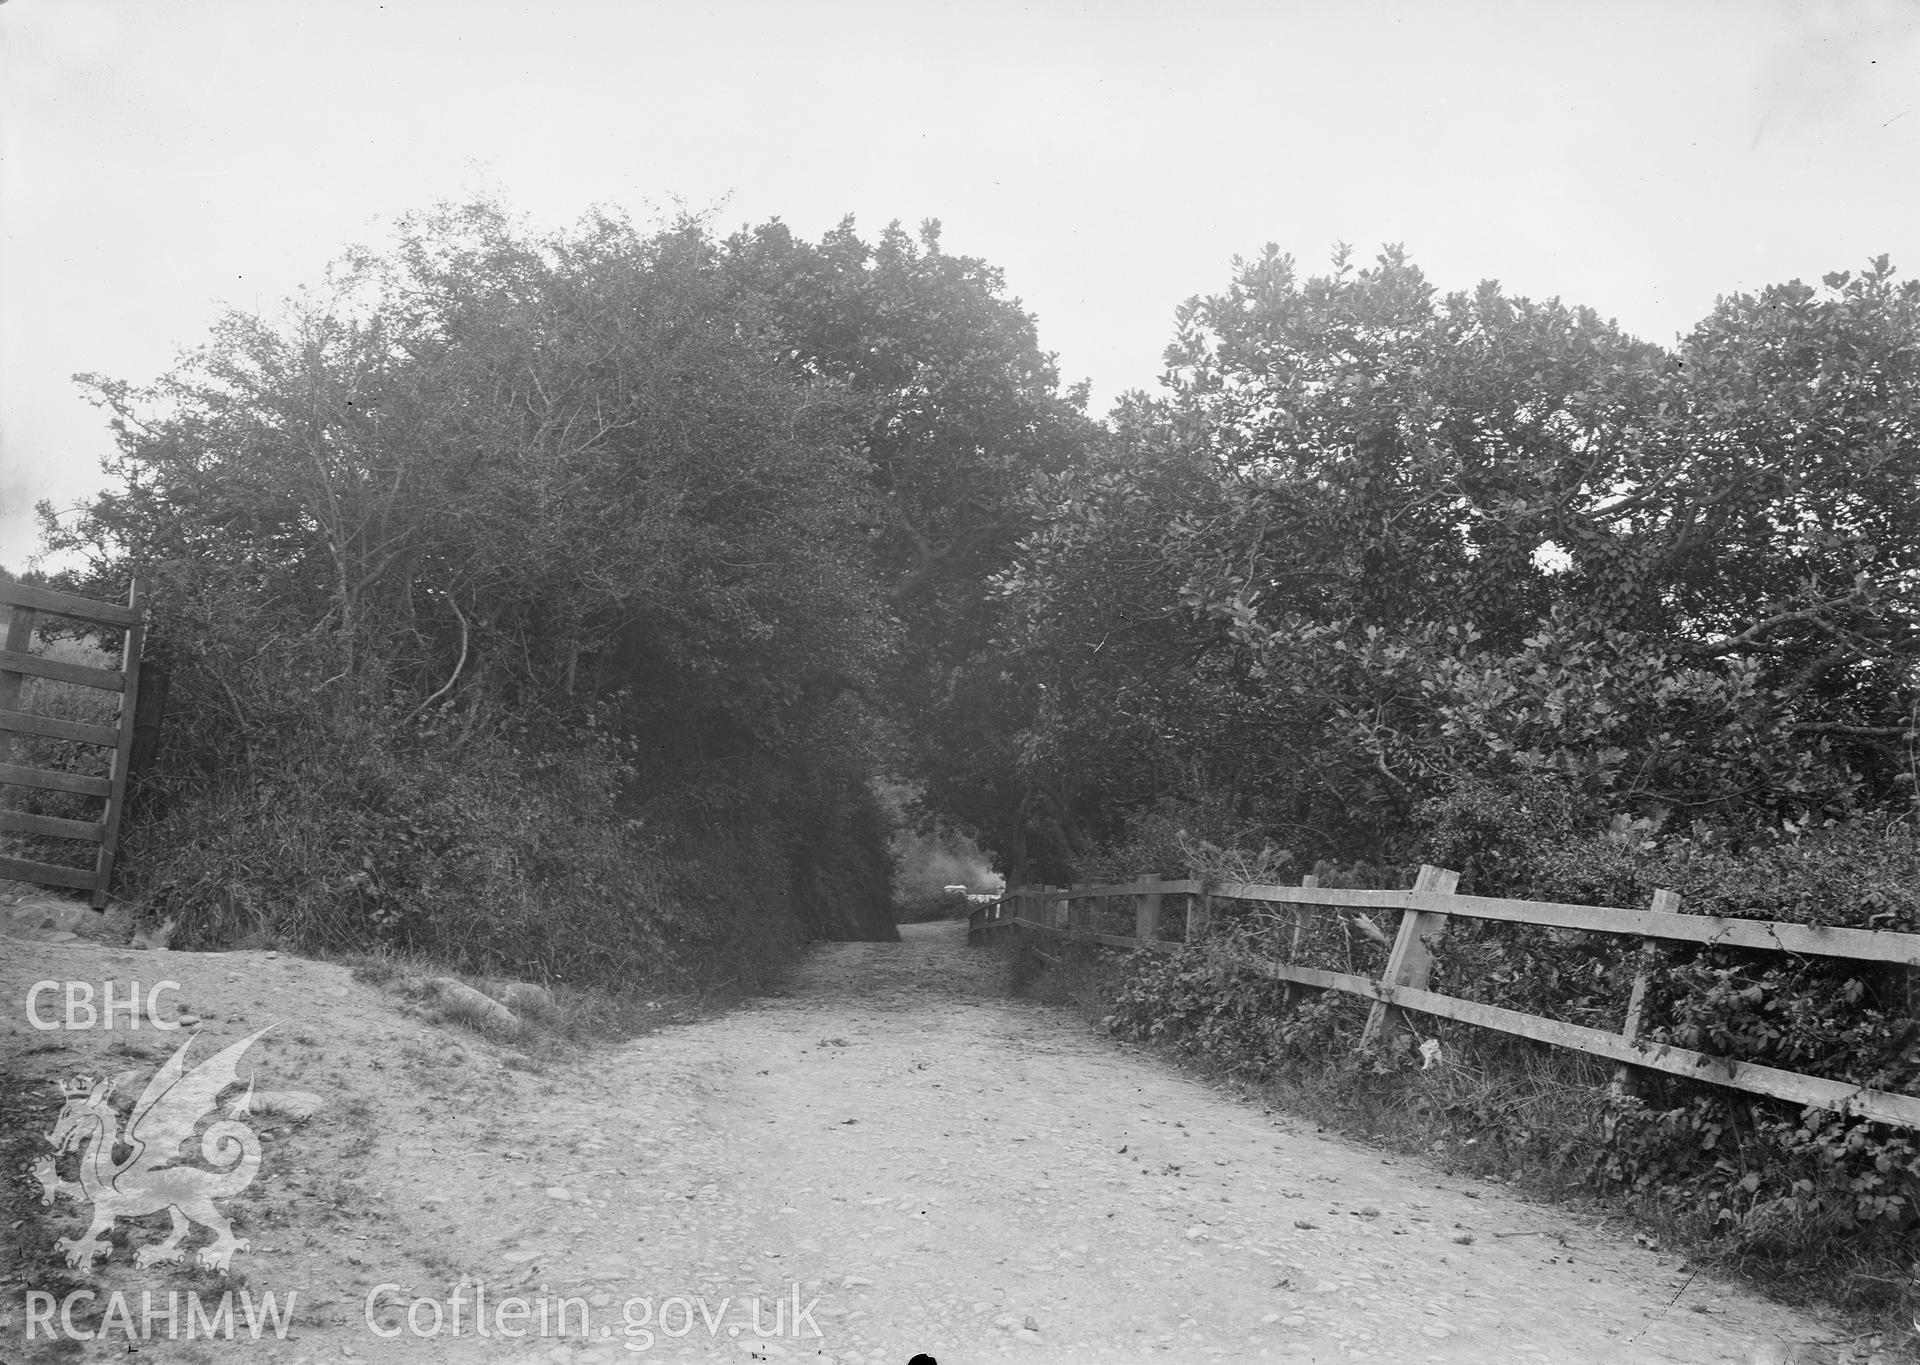 Black and white image dating from c.1910 showing Cwm Woods,  taken by Emile T. Evans.